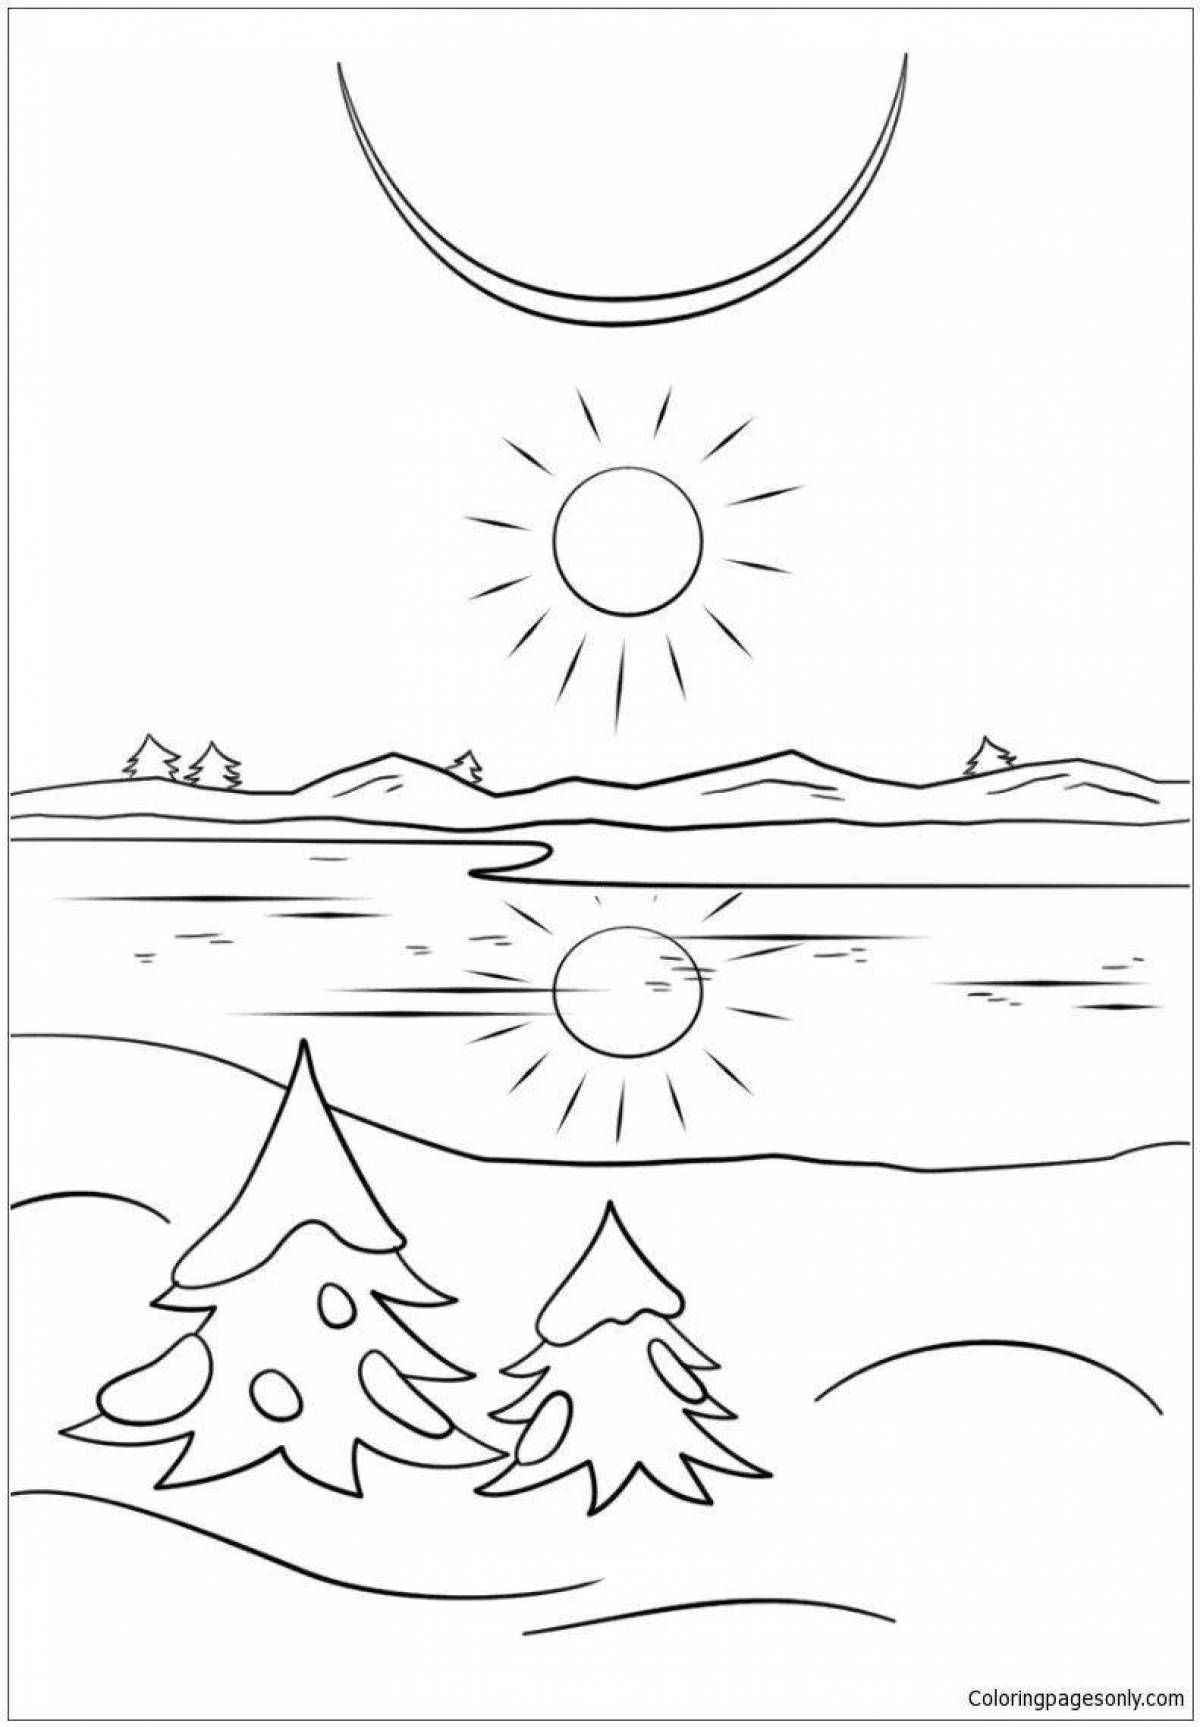 Winter Morning Inspirational Coloring Page